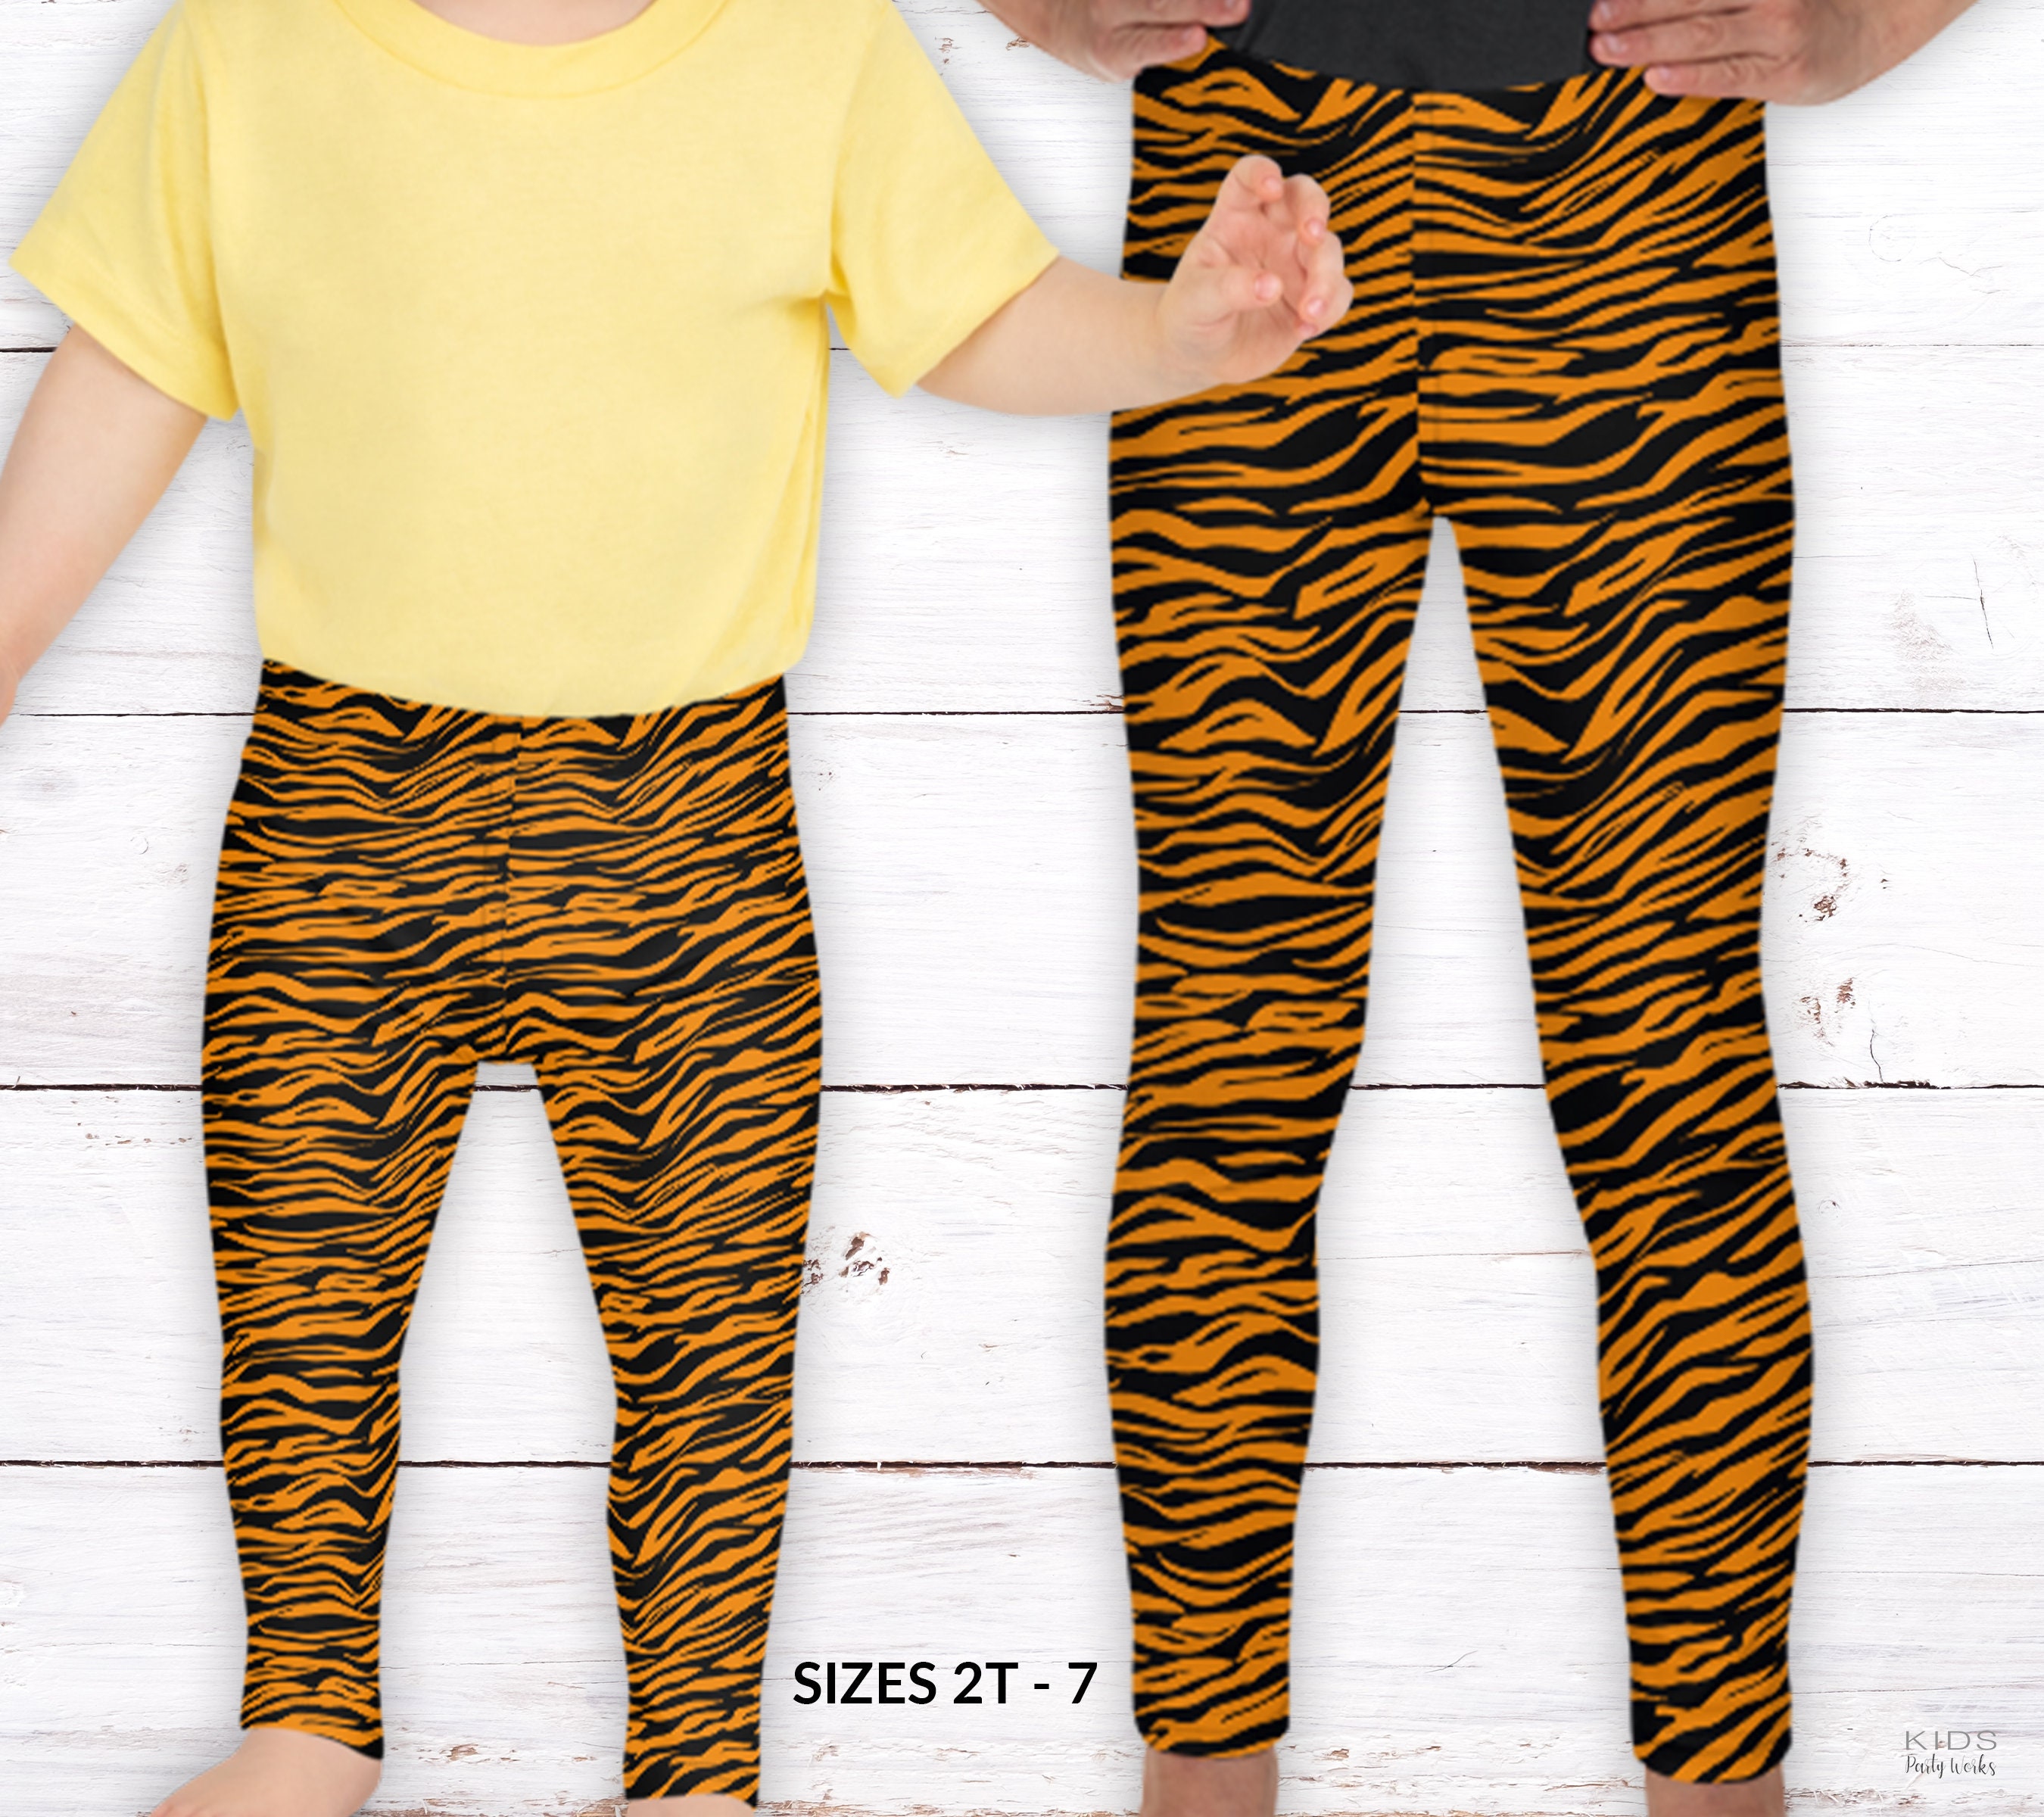 Midnight Animal Print Baby & Toddler leggings - Me and Max